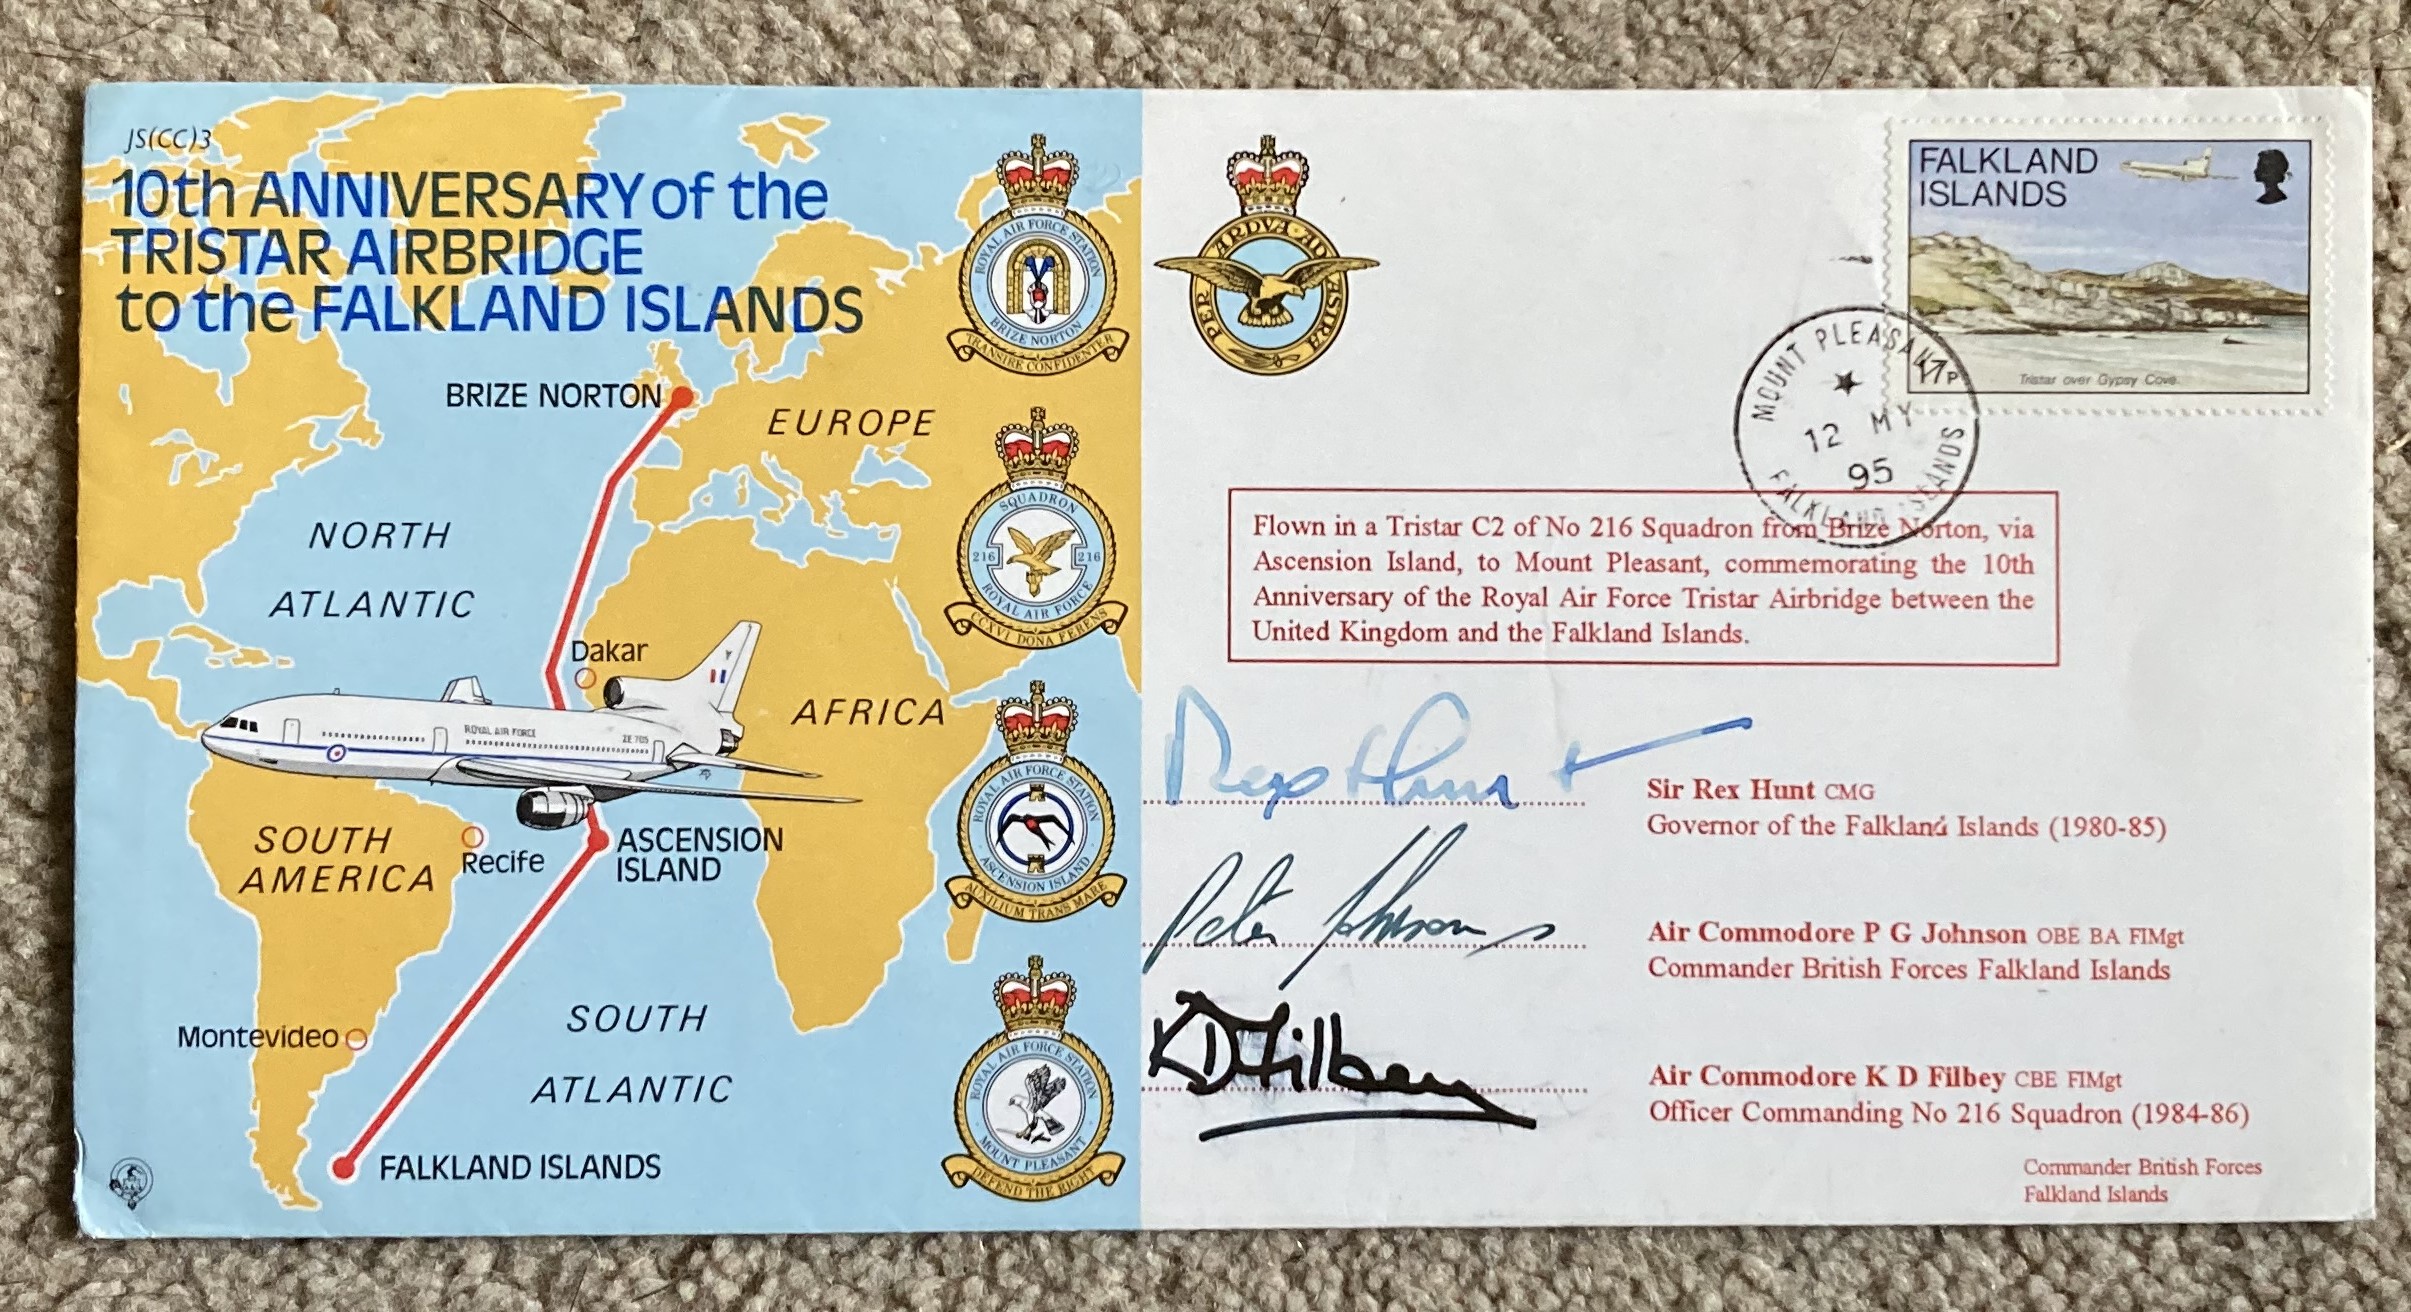 Falklands 10th ann Airbridge cover signed by Rex Hunt, Air Cdre Johnson and Filbey. All autographs